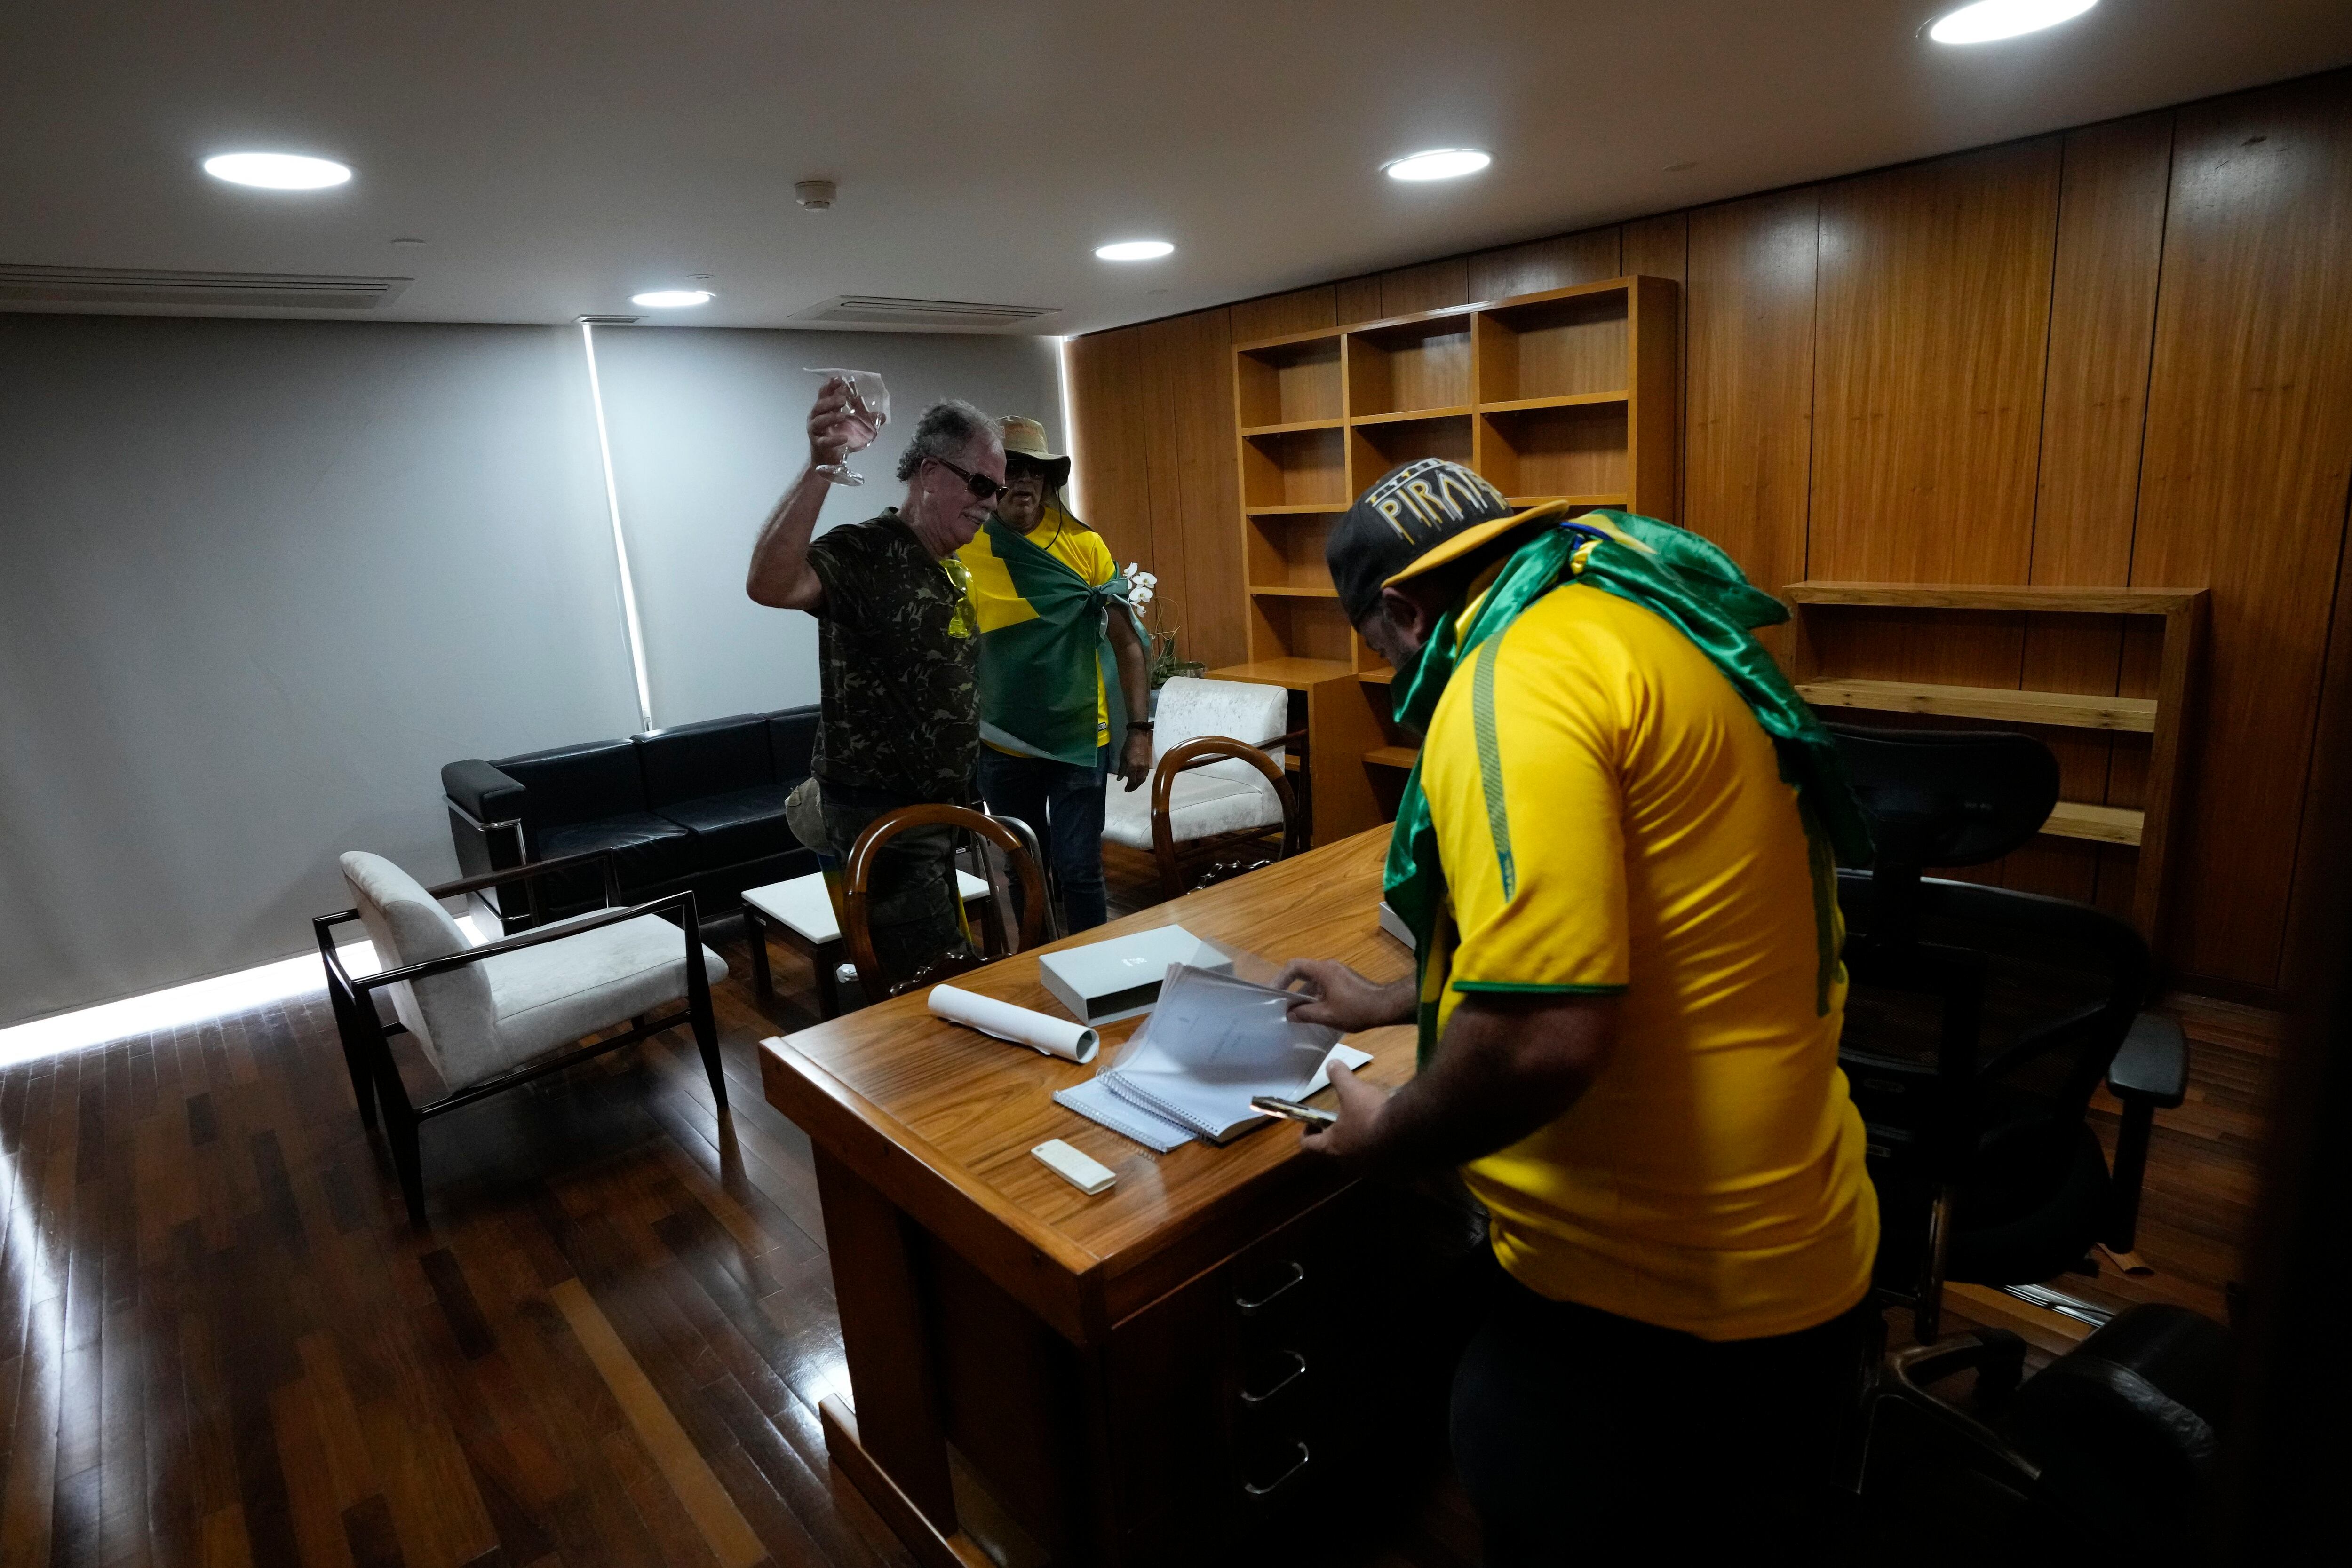 Protesters, supporters of former Brazilian President Jair Bolsonaro, go through papers on a desk after storming the Planalto Palace in Brasilia, Brazil.